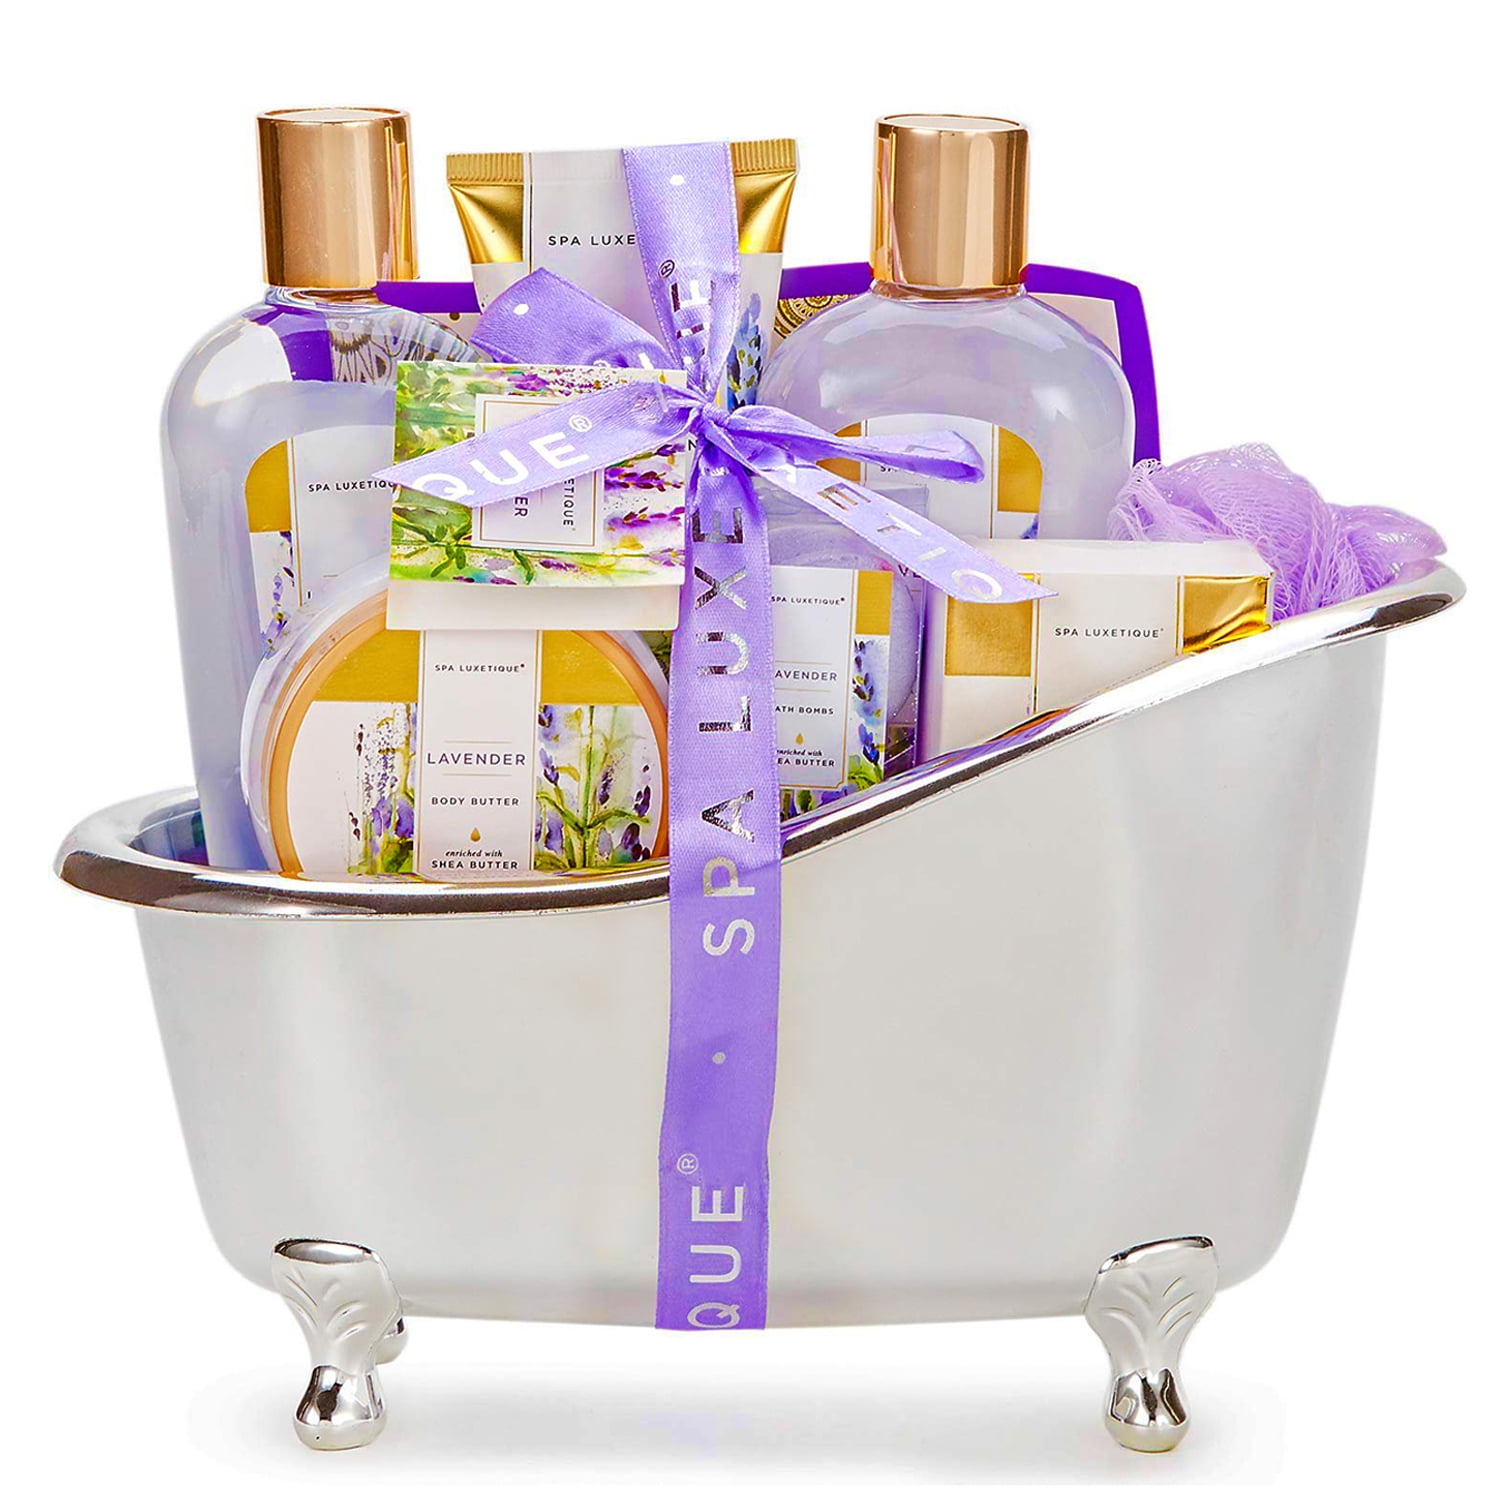 Lizush Trio Spa Gift Basket and Self Care Gifts for Women with Wine Glass, Candle, Grapefruit Body Scrub, Eye Mask - Enjoy Every Moment - 4 Piece Set